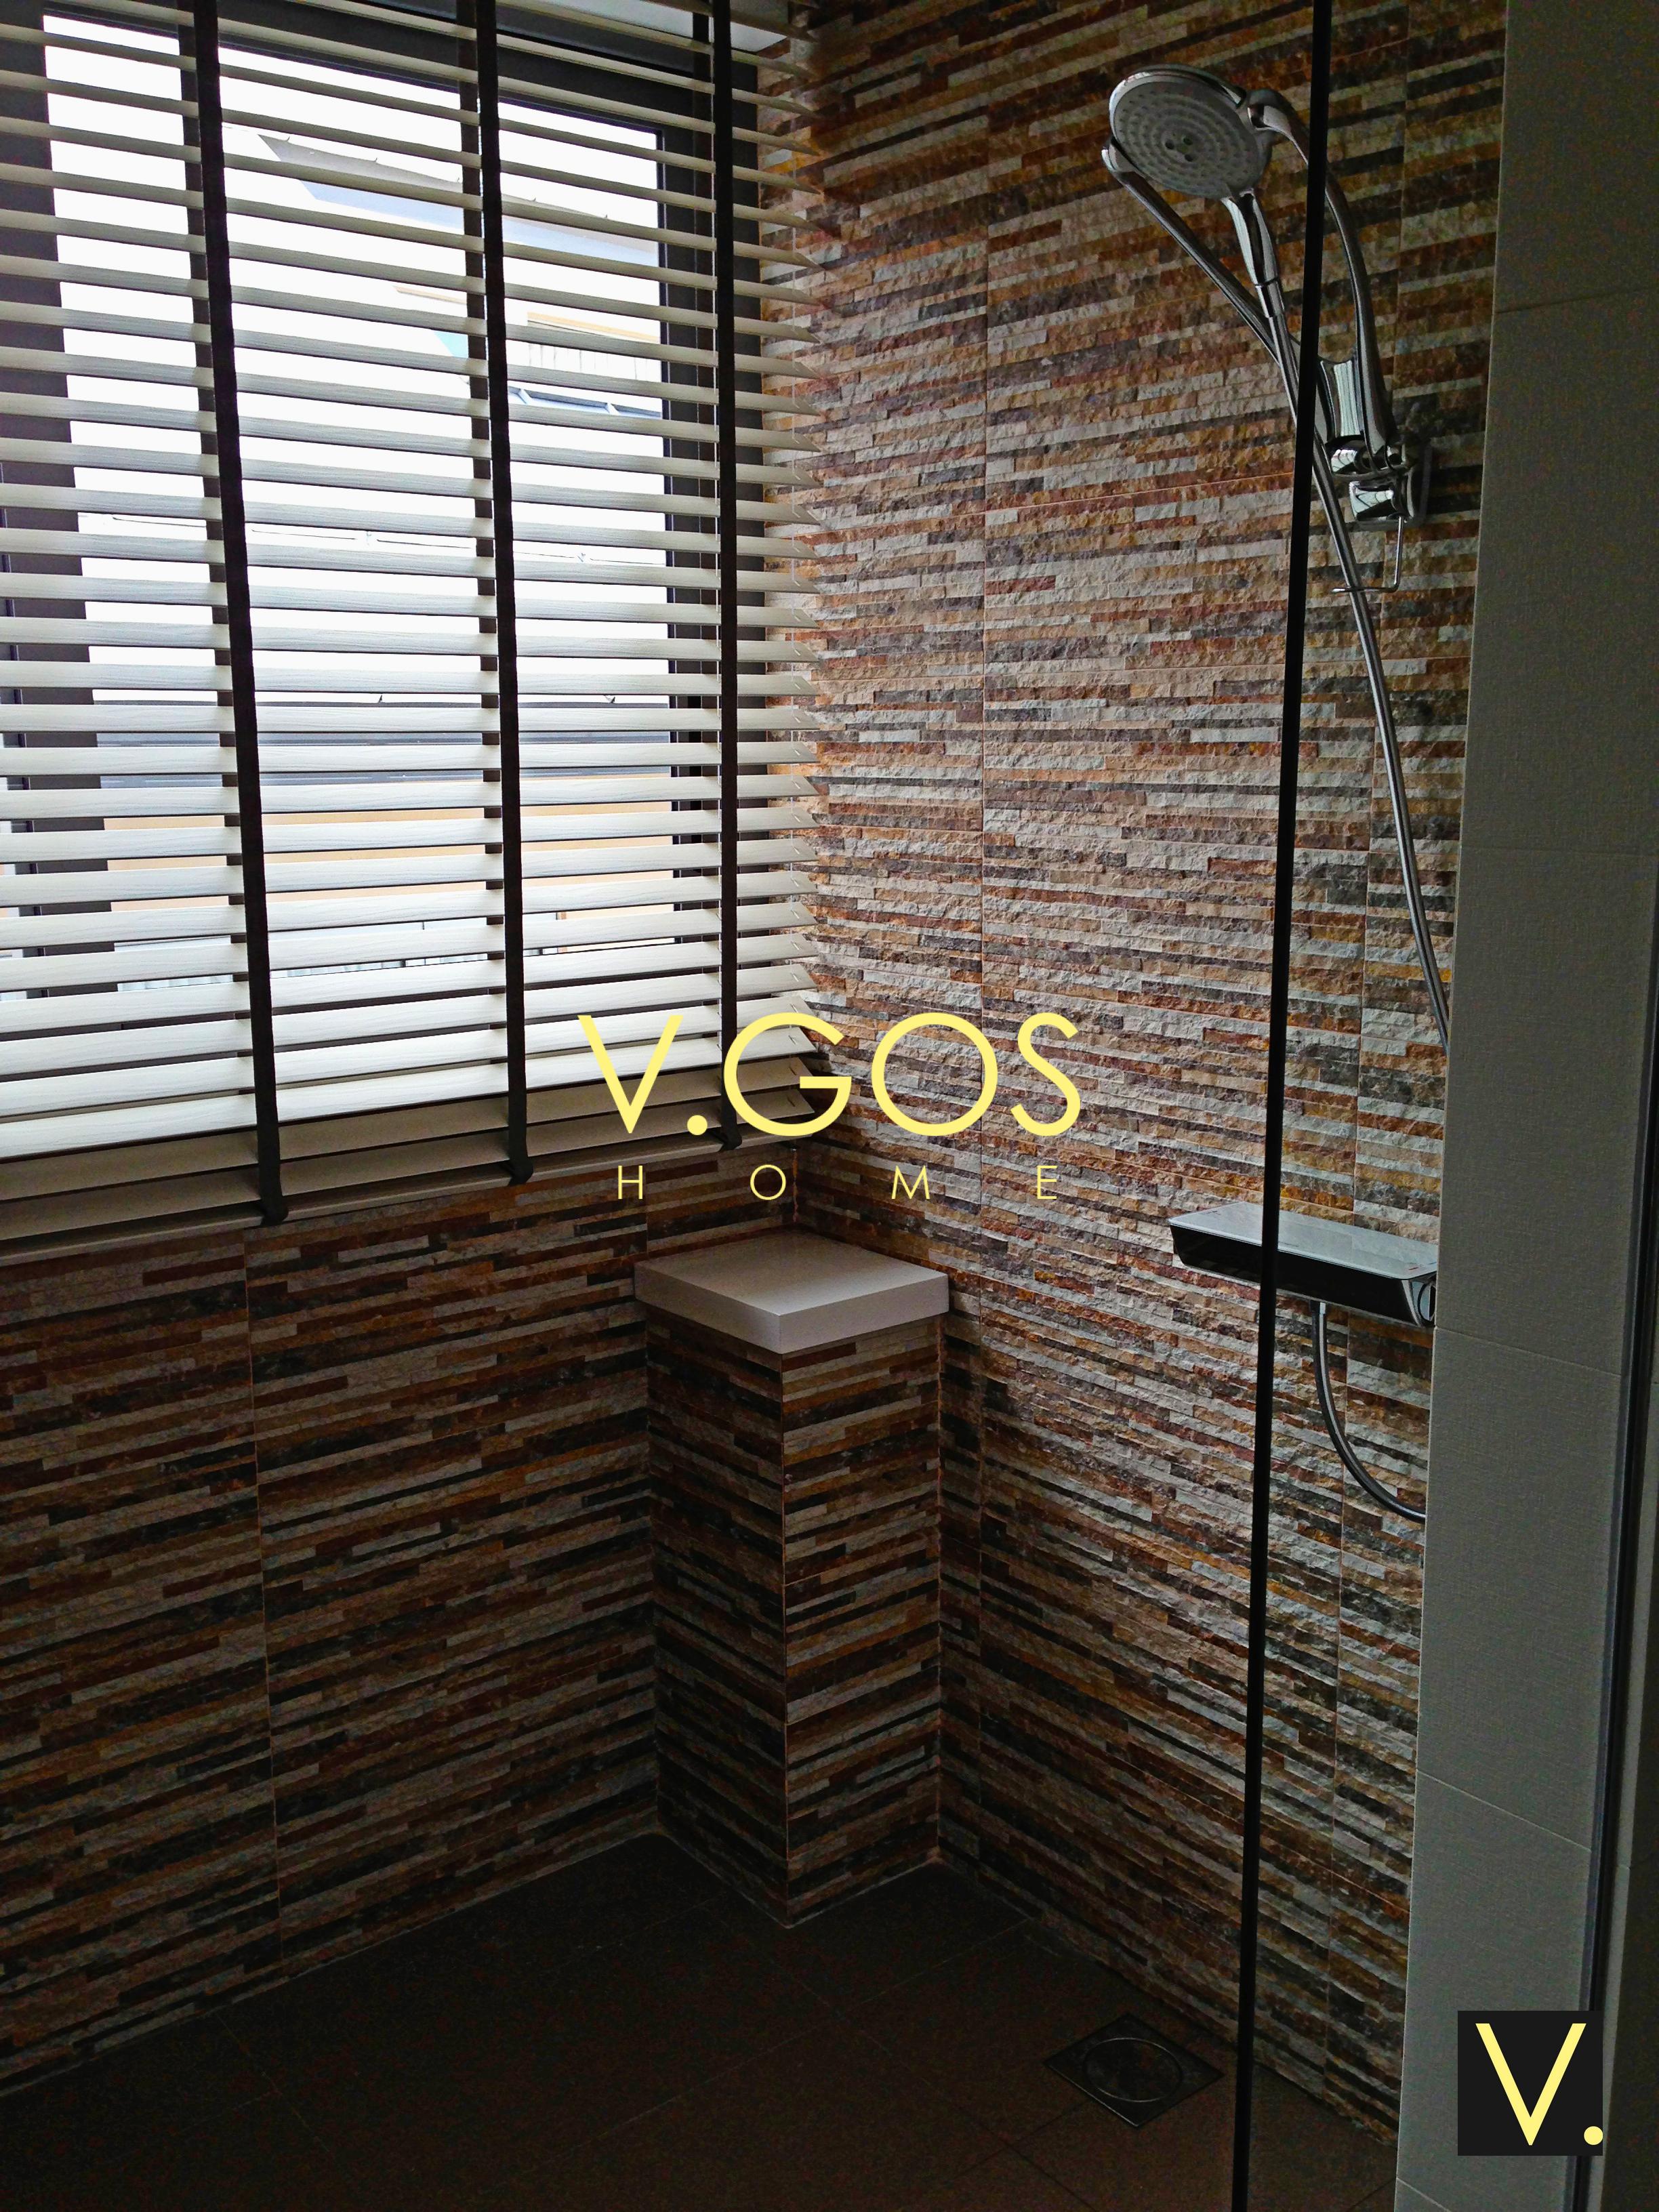 Basewood venetian blind with wooven tape